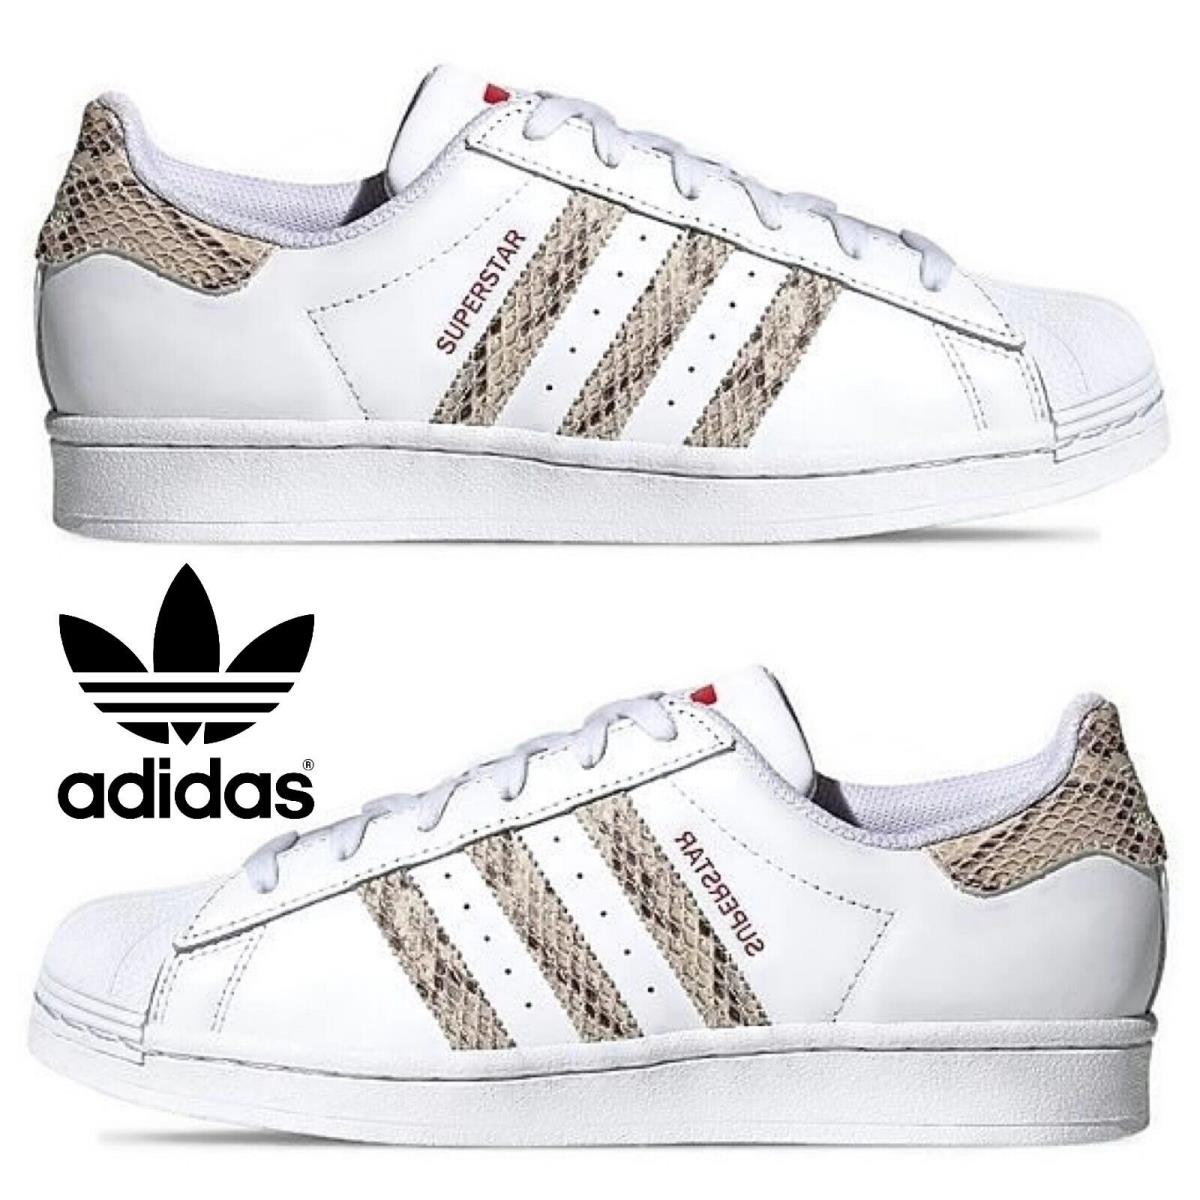 Adidas Originals Superstar Women s Sneakers Casual Shoes Sport Gym Beige White